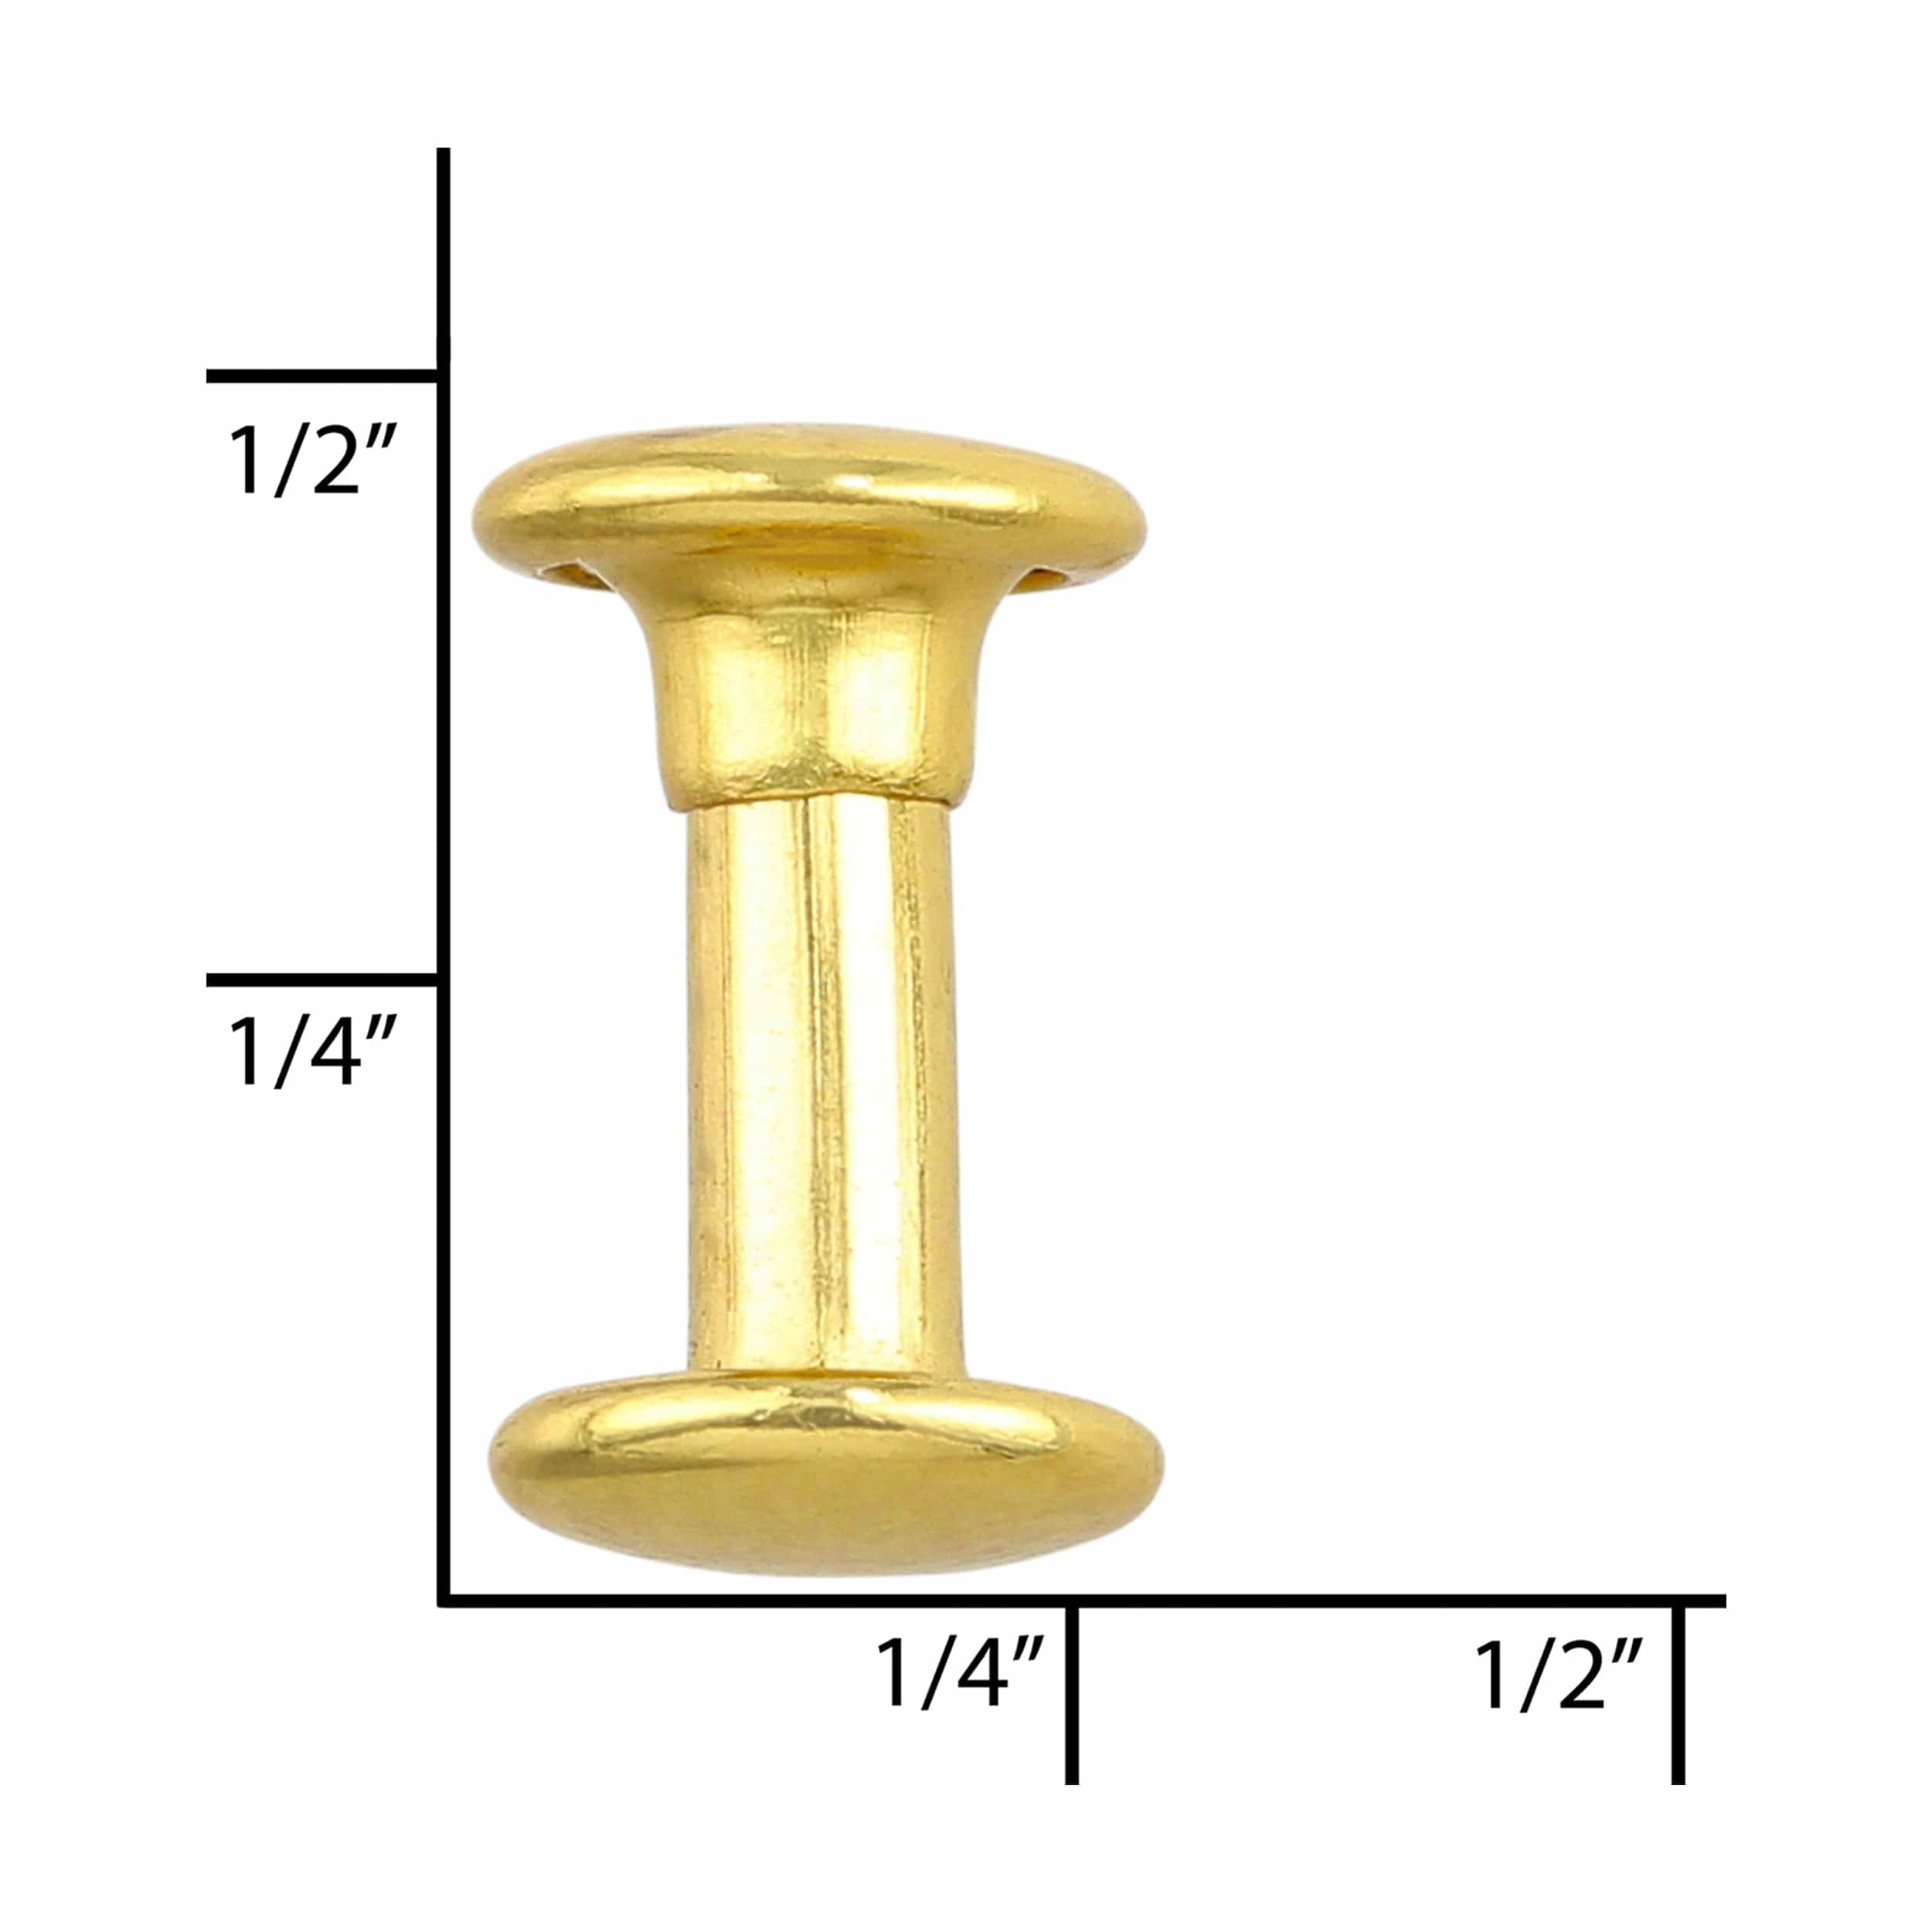 Ohio Travel Bag Fasteners 12mm Gold, Double Cap Jiffy Rivet, Steel, #A-339-GOLD A-339-GOLD